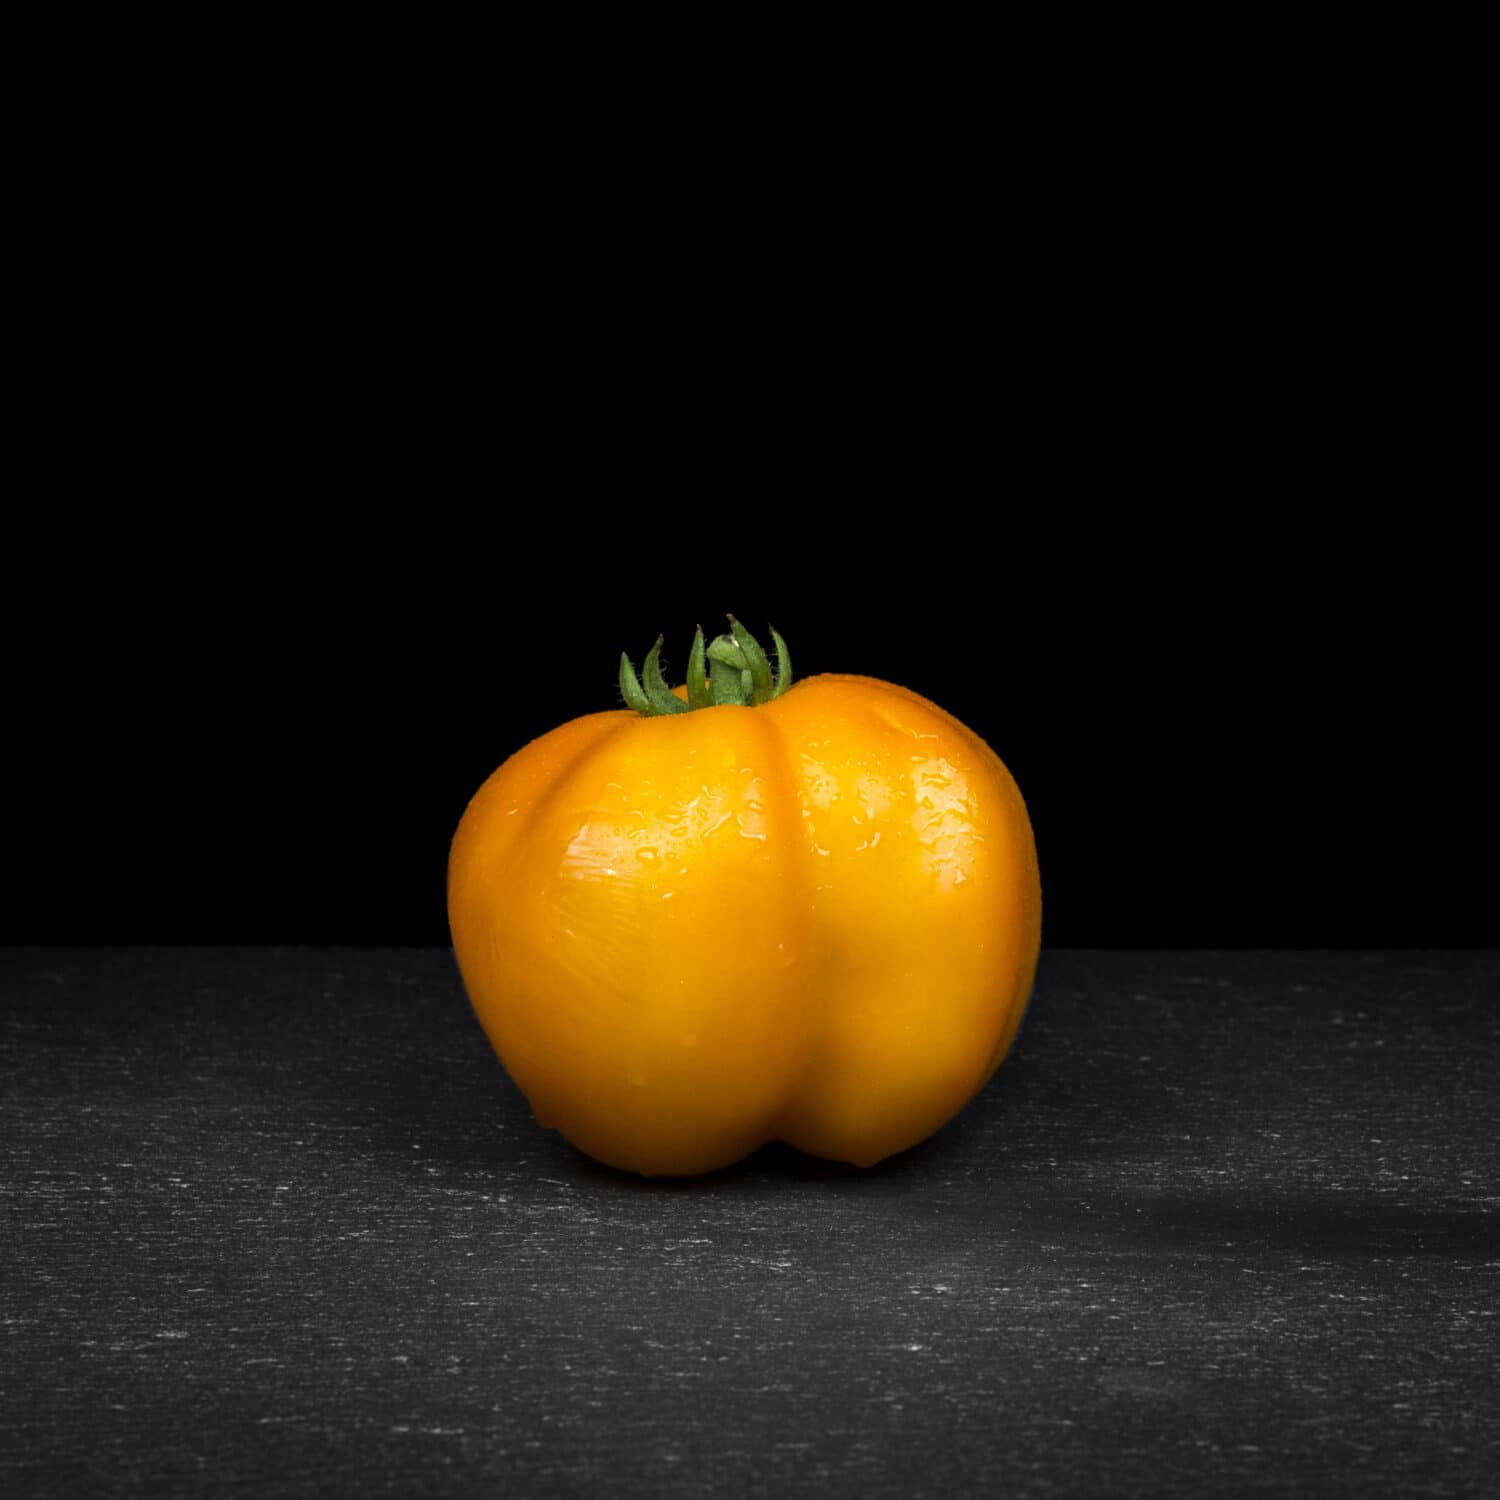 Tomato (breed: Yellow Stuffer) with water droplets on black slate with dark background (solanum lycopersicum)